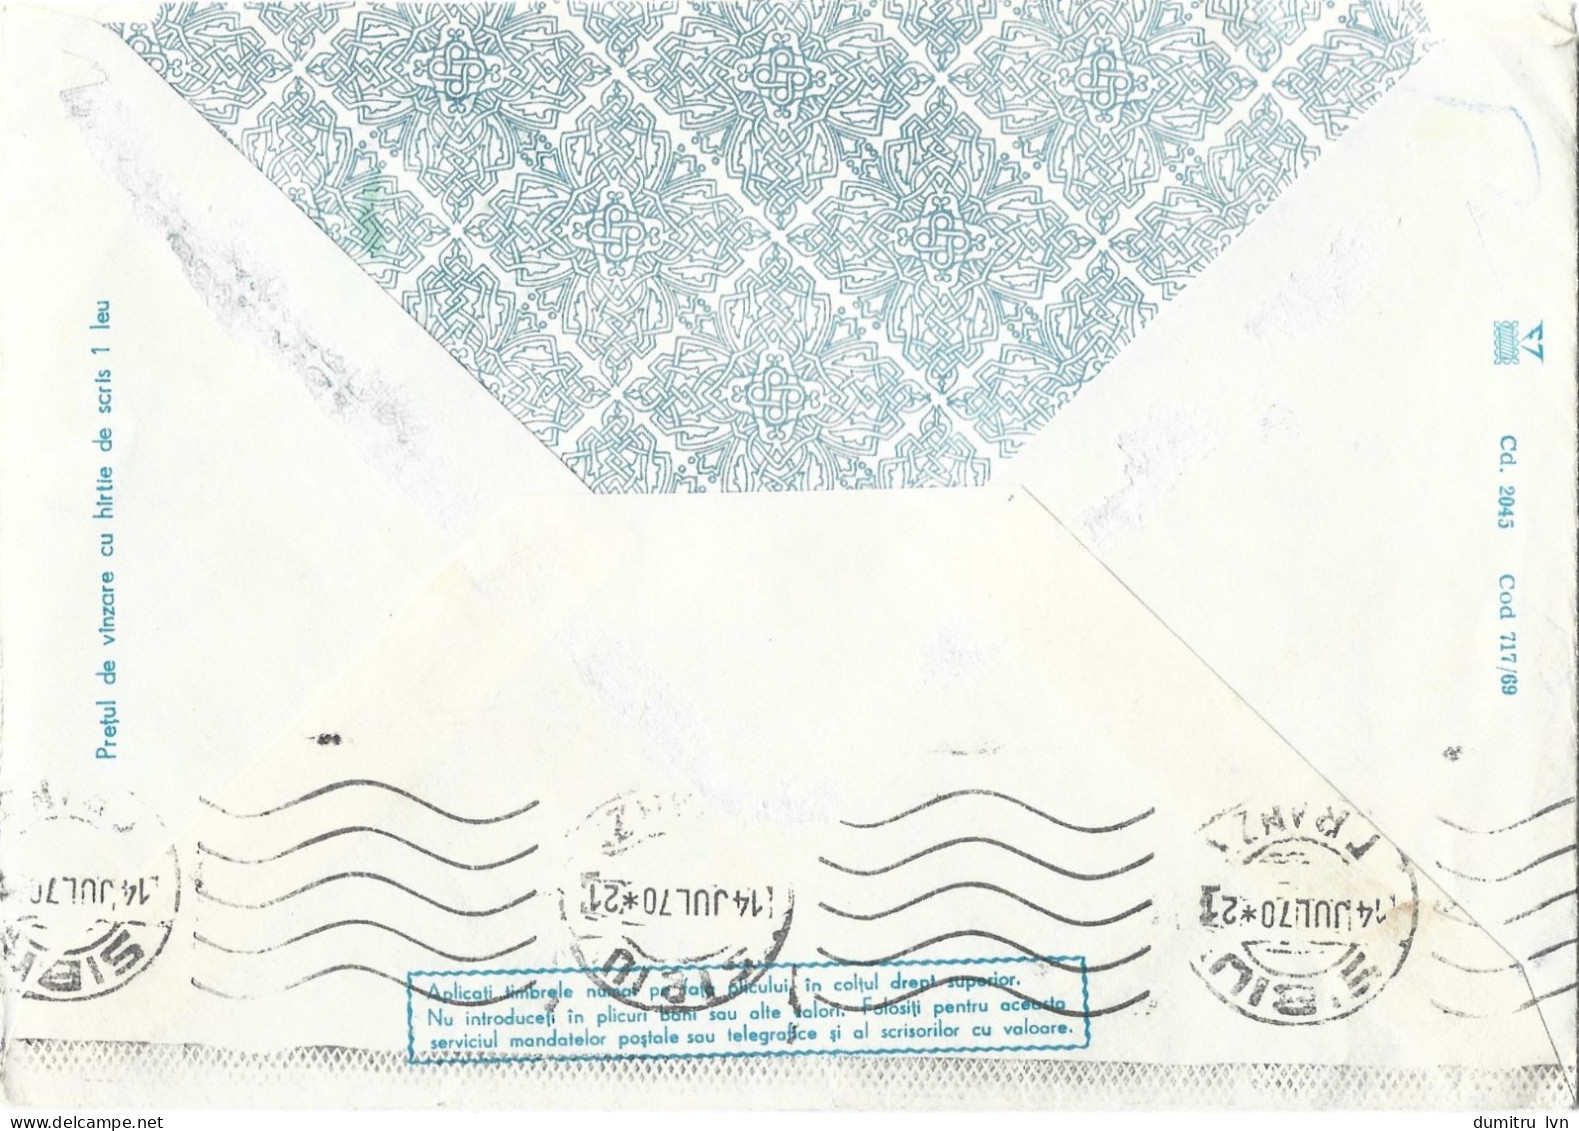 ROMANIA 1969 WINTER LANDSCAPE, SKIERS, CIRCULATED ENVELOPE, COVER STATIONERY - Postal Stationery